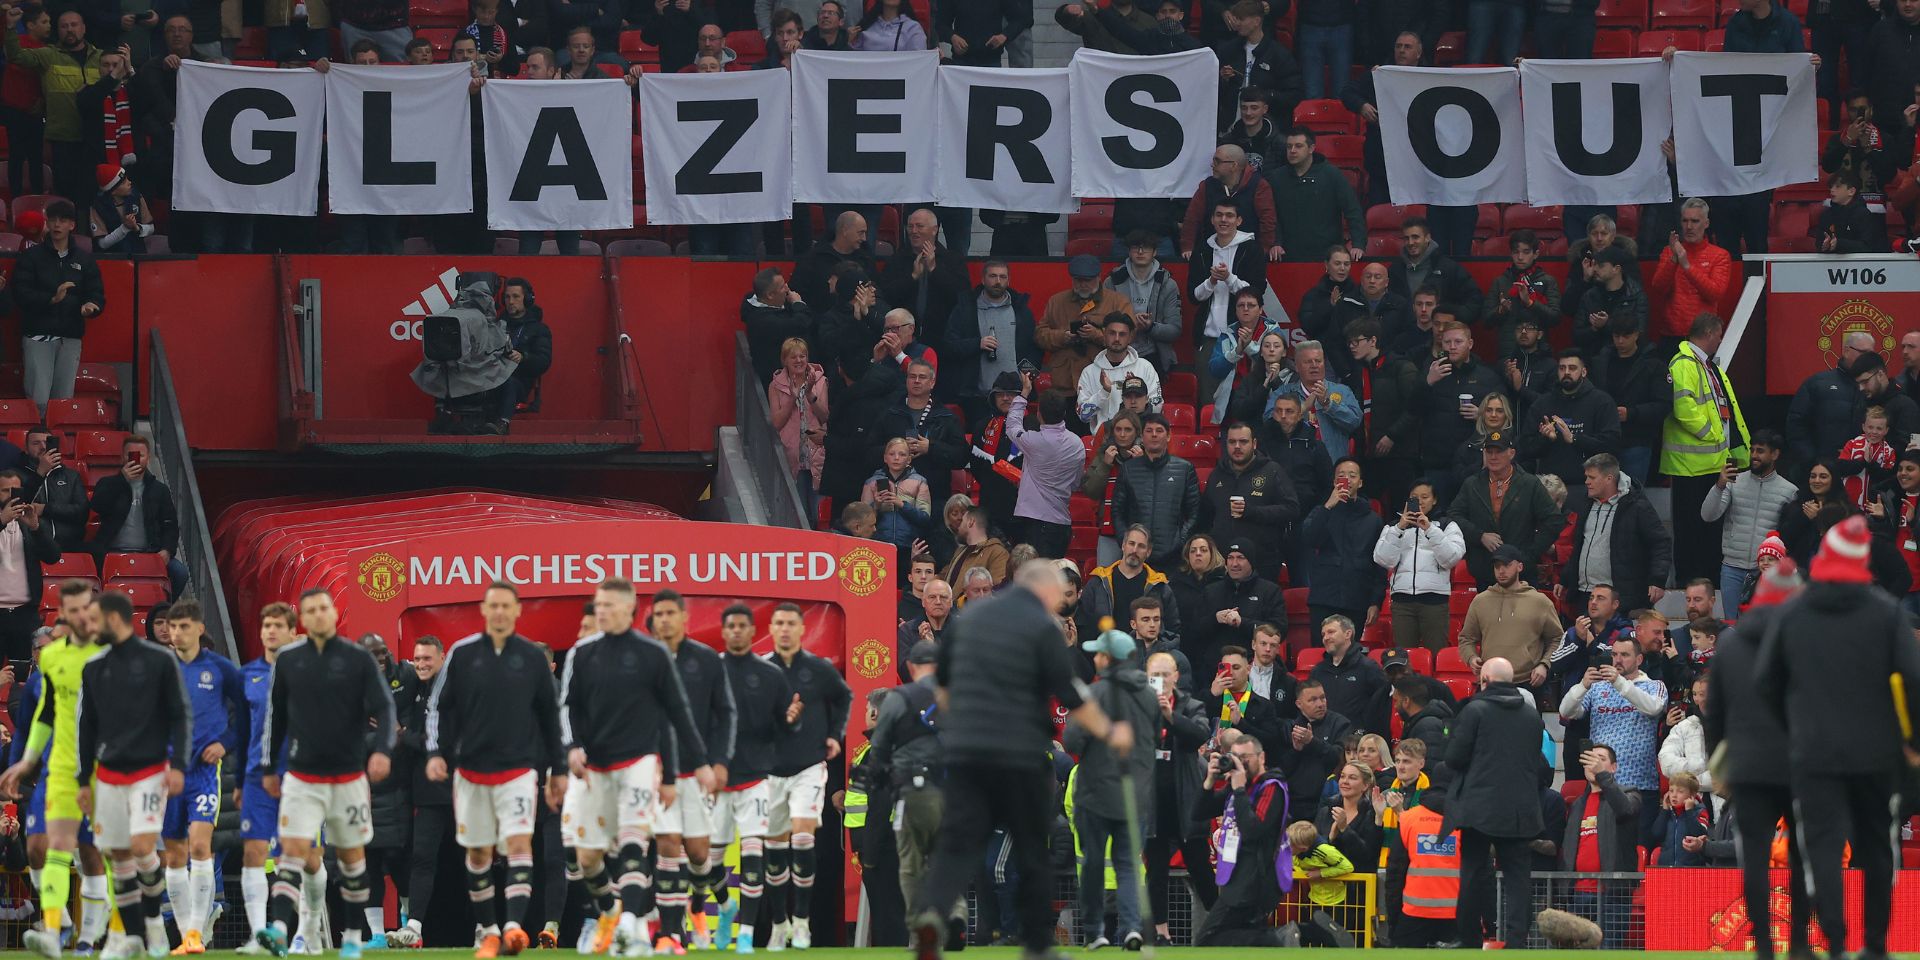 Details of Manchester United fans’ planned protests ahead of their match against Liverpool have been shared online